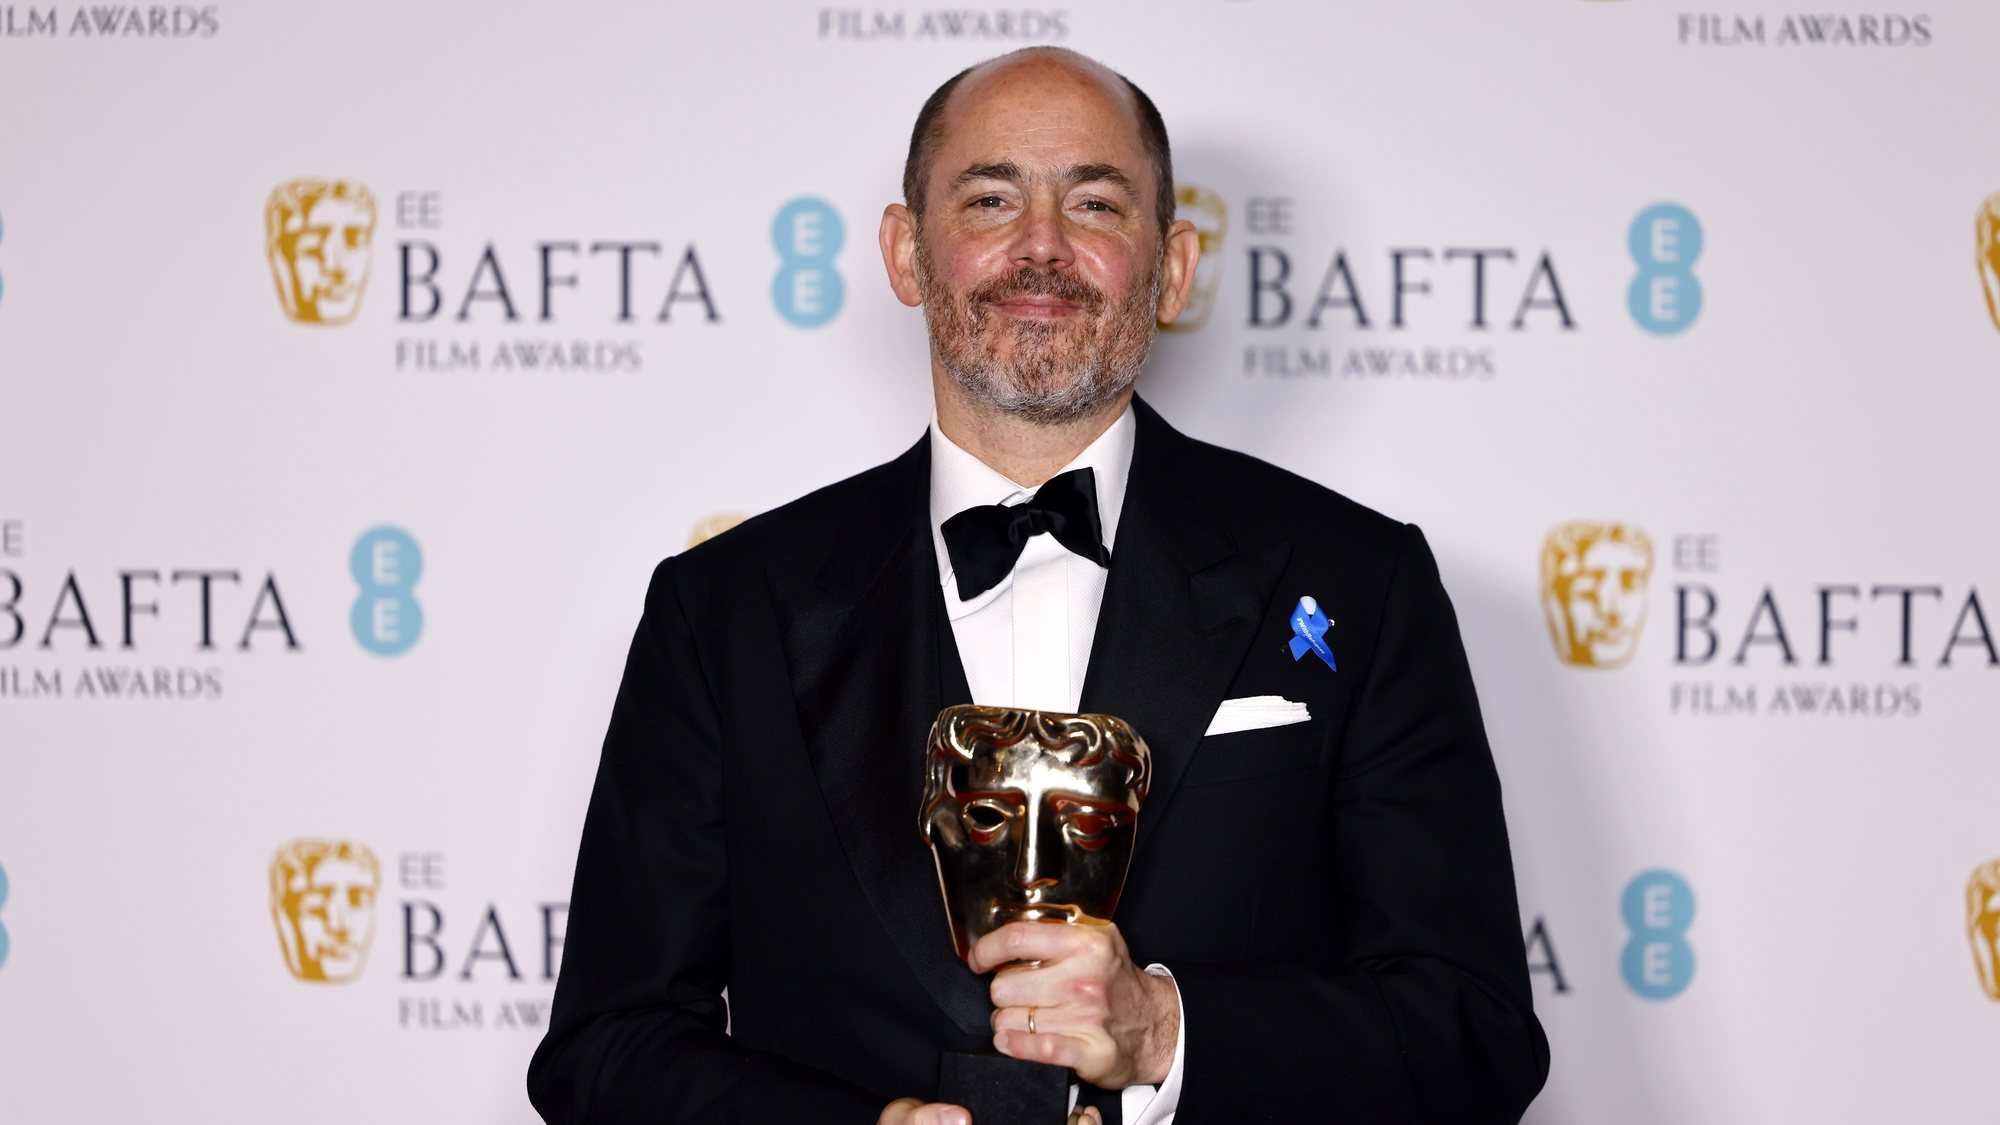 epa10478787 Edward Berger, winner of the &#039;Best Director Award&#039;, poses in the press room of the 2023 EE BAFTA Film Awards ceremony at the Southbank Centre, in London, Britain, 19 February 2023. The event is hosted by the British Academy of Film and Television Arts (BAFTA).  EPA/TOLGA AKMEN *** Local Caption *** TEST CAPTION